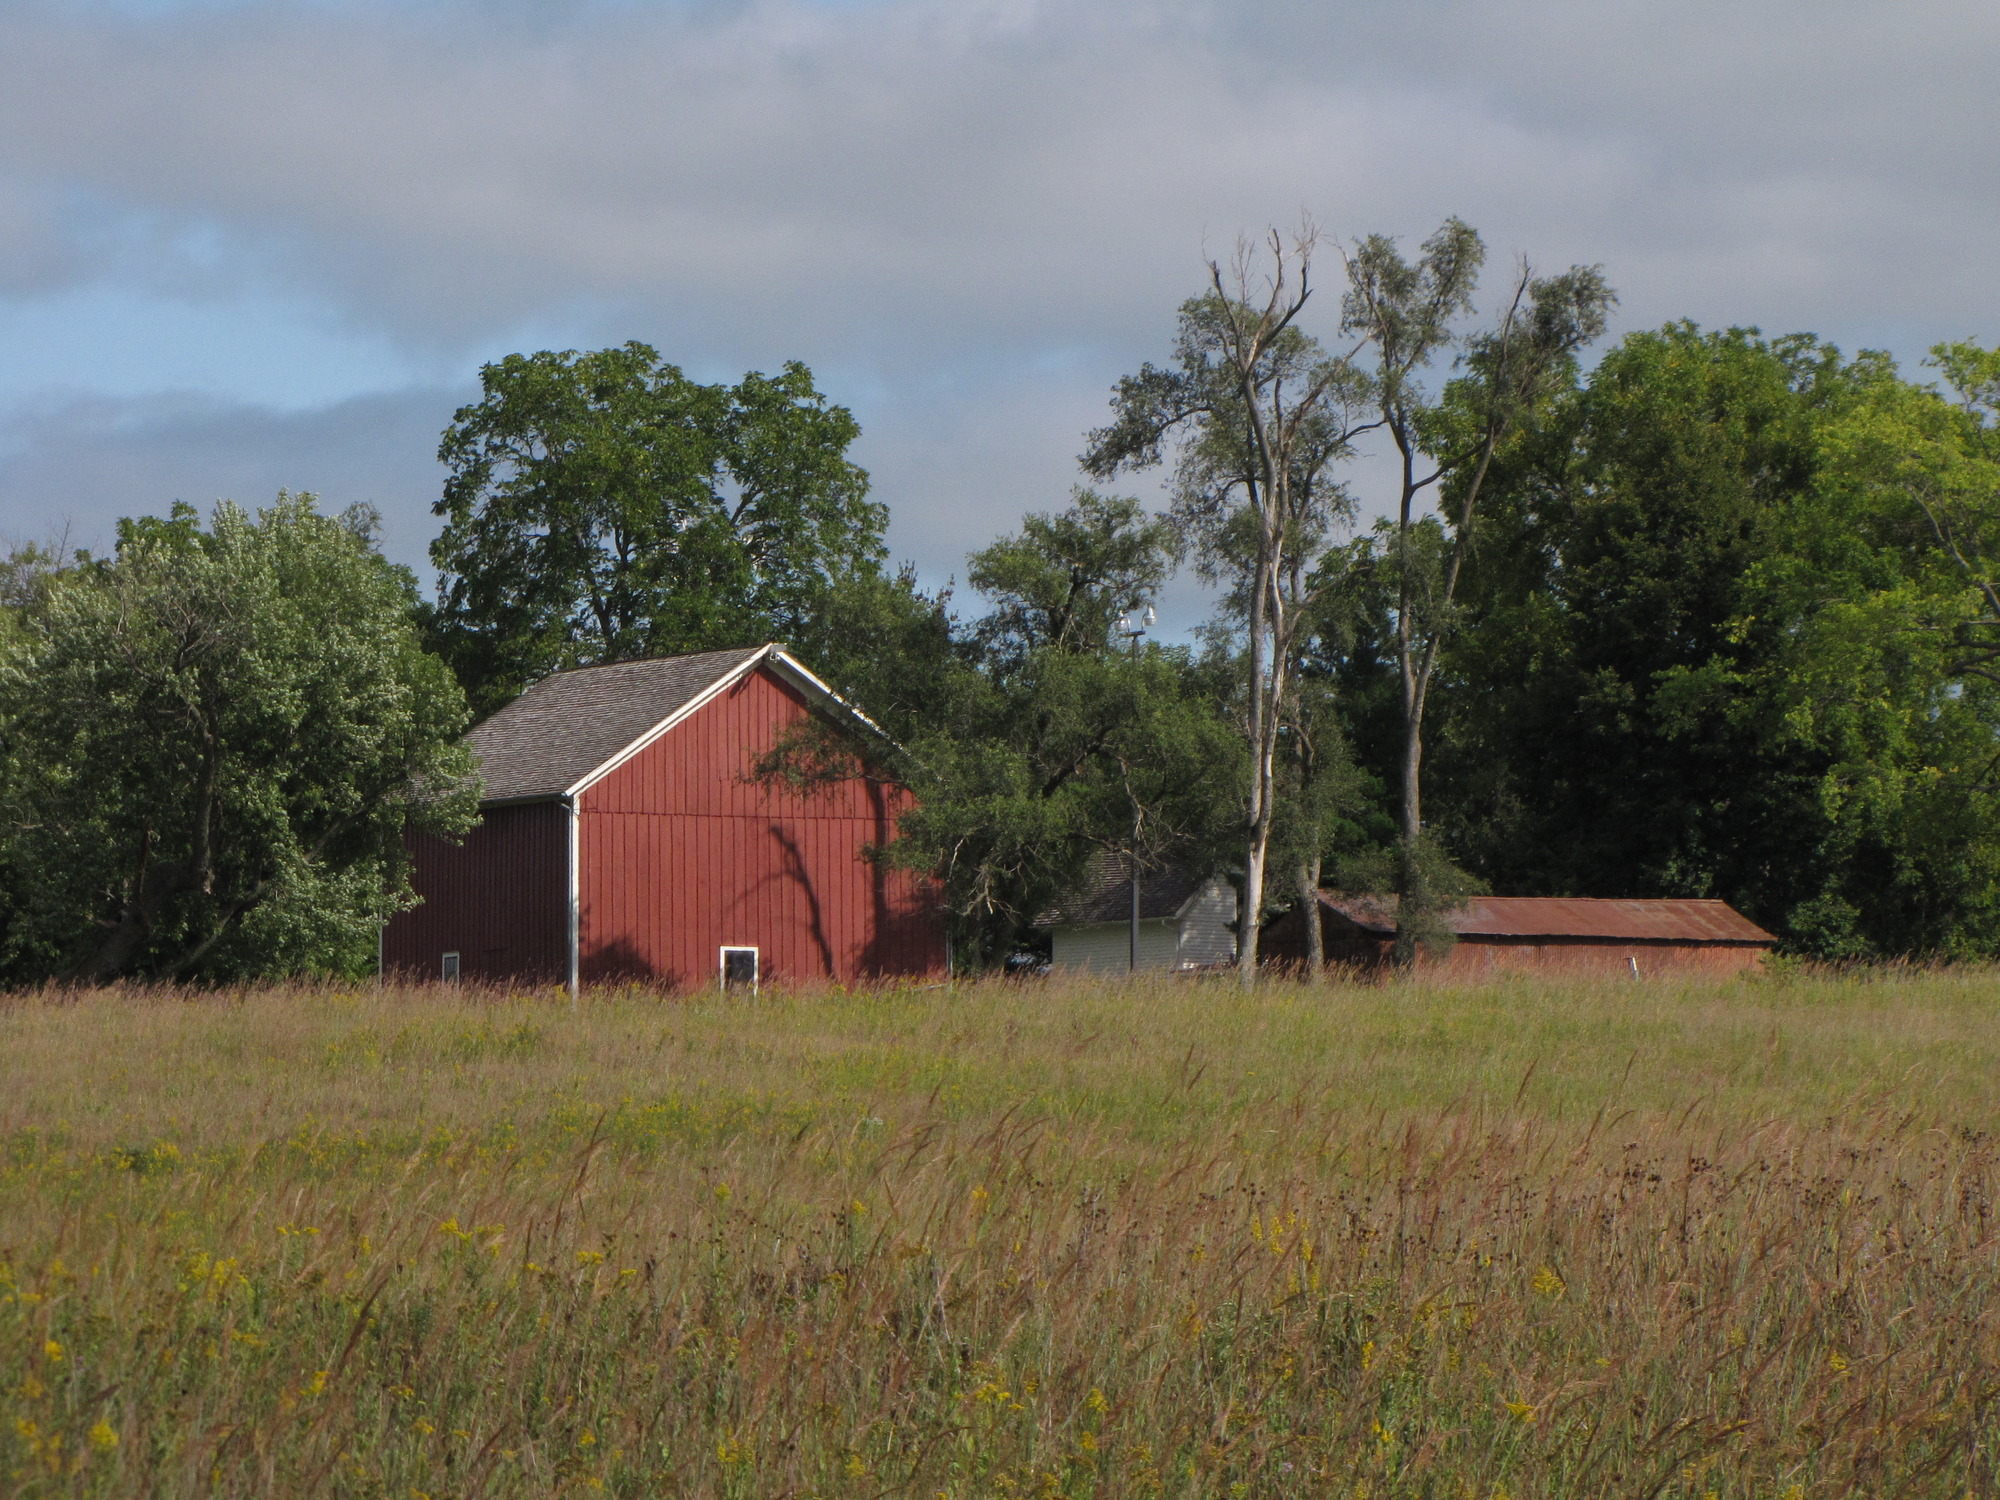 A red barn stands out among other farm buildings that overlook a prairie.